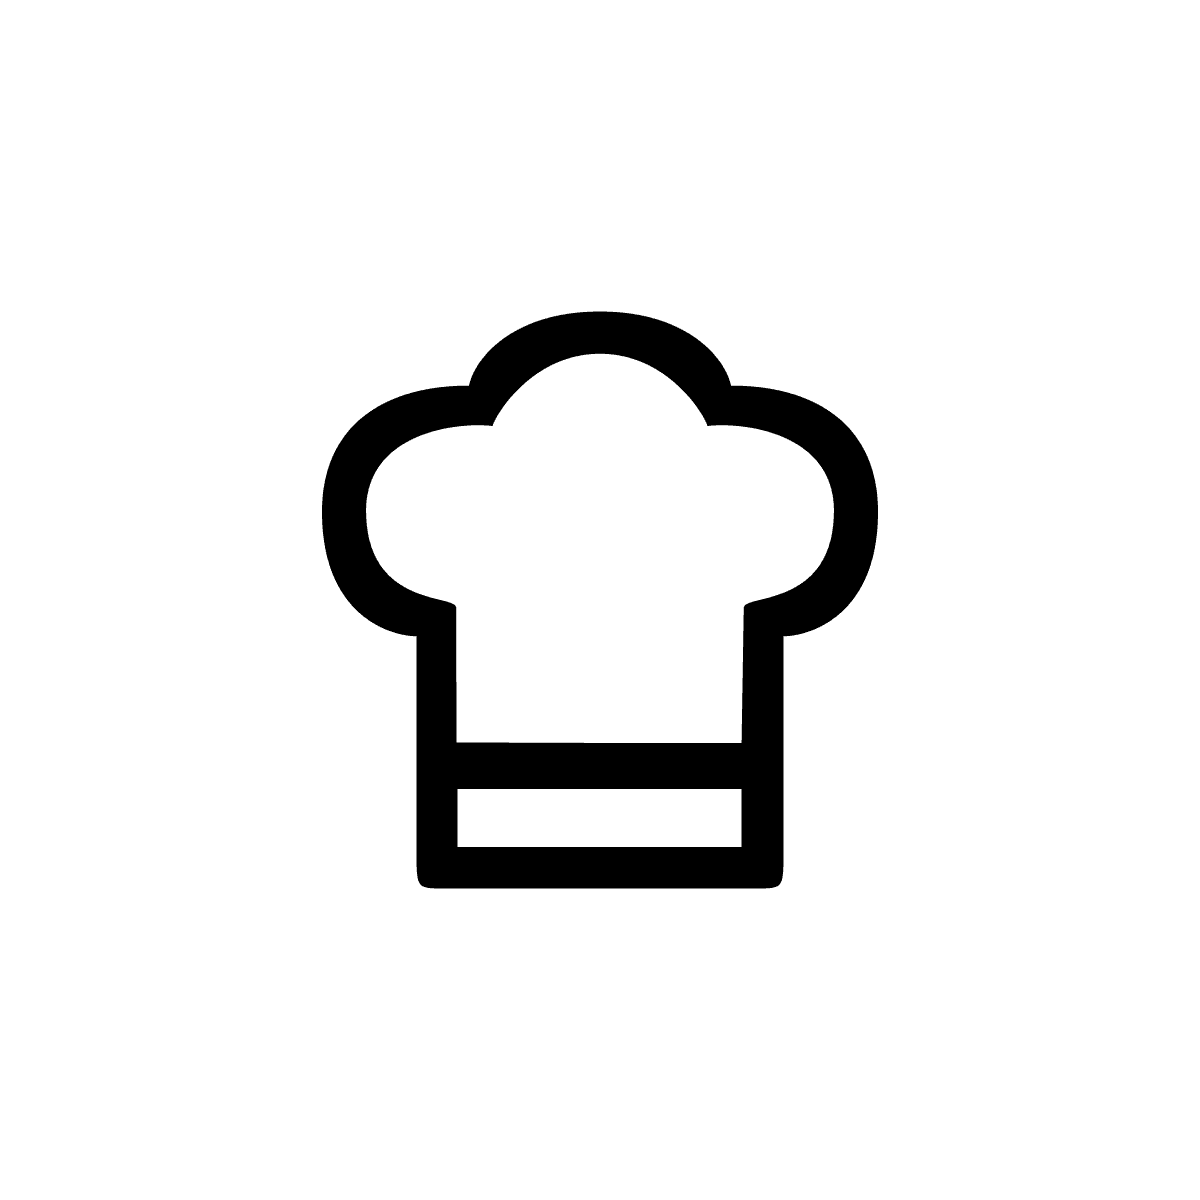 Flat back and white chef hat icon